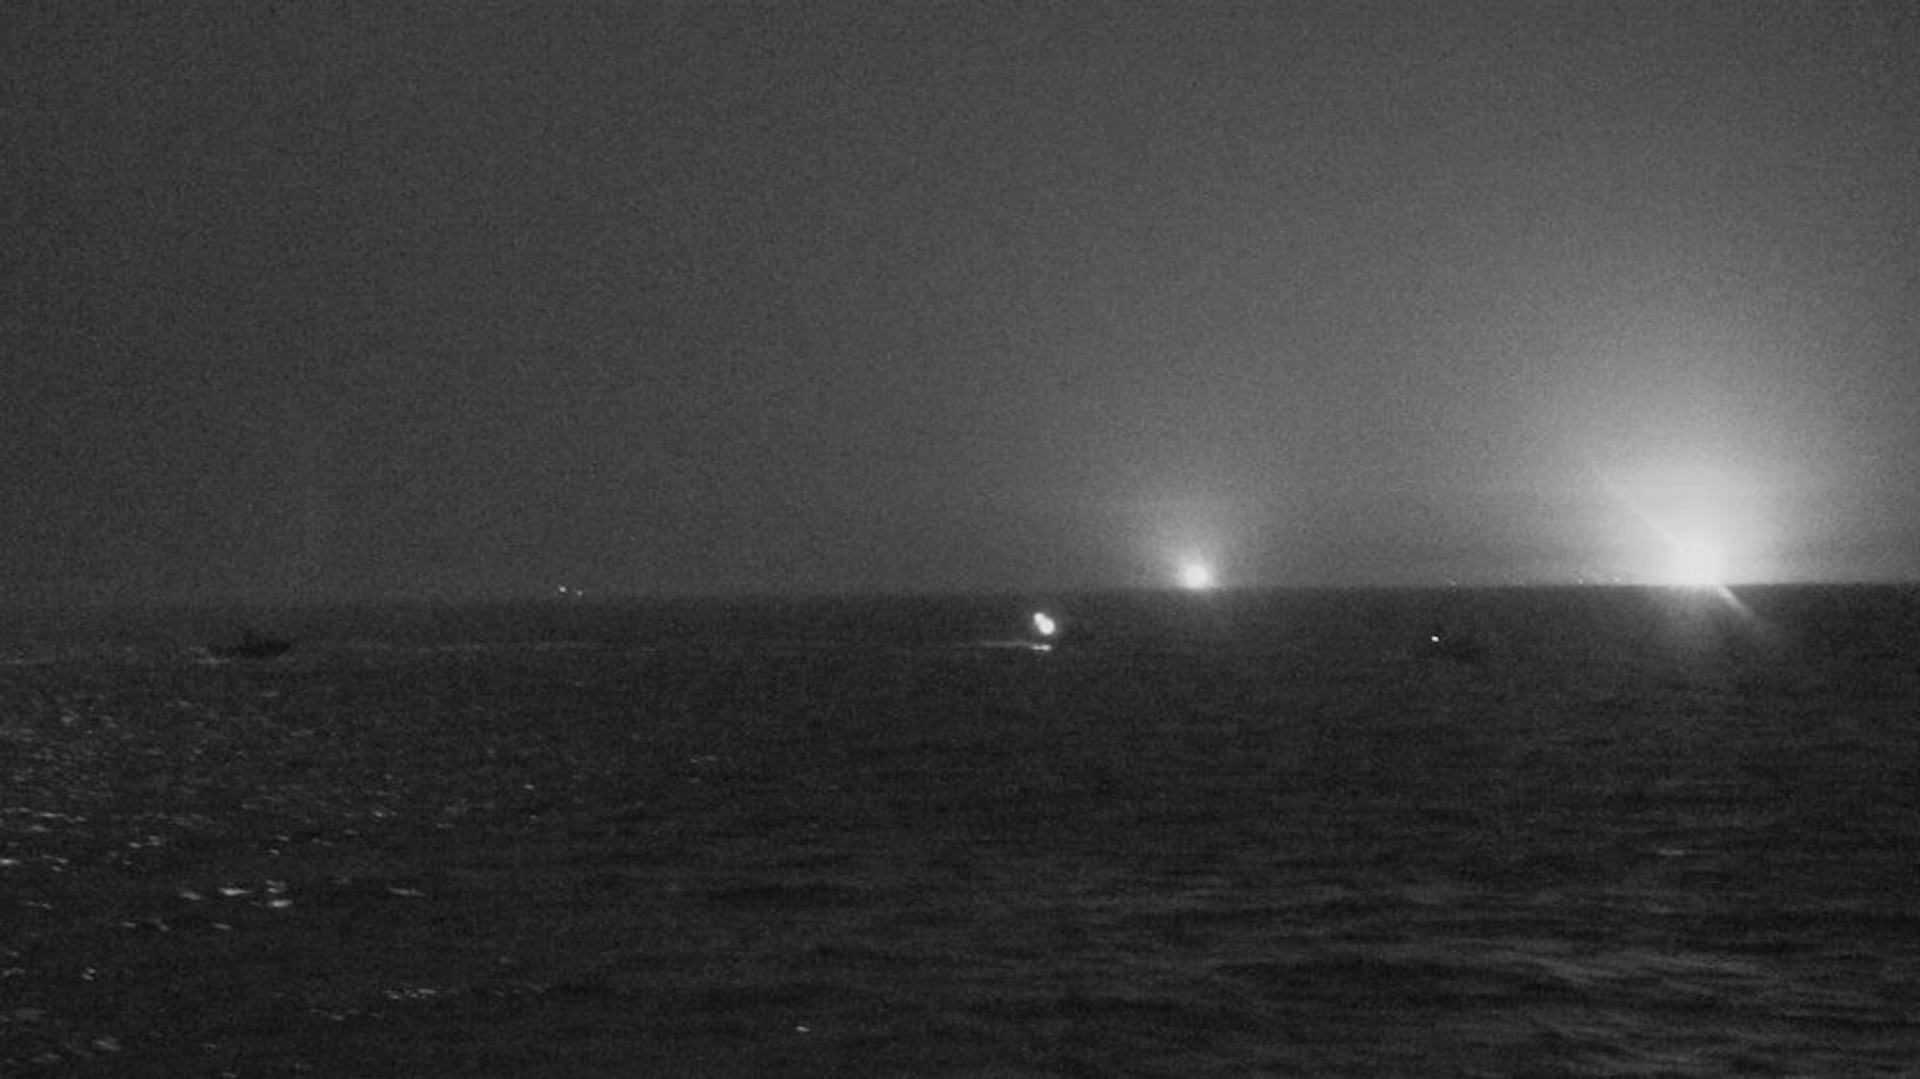 210426-N-NO146-1002 ARABIAN GULF (April 26, 2021) Three Iranian Islamic Revolutionary Guard Corps Navy (IRGCN) fast inshore attack craft (FIAC) approach the U.S. Coast Guard patrol boat USCGC Baranof (WPB 1318) and patrol coastal ship USS Firebolt (PC 10), while the U.S. vessels were conducting routine maritime security patrols in the international waters of the North Arabian Gulf, April 26. Firebolt is assigned to U.S. Naval Forces Central Command’s Task Force (TF) 55 and Baranof is assigned to Patrol Forces Southwest Asia (PATFORSWA), the largest U.S. Coast Guard unit outside the United States, and operates under TF 55. (U.S. Navy Photo)